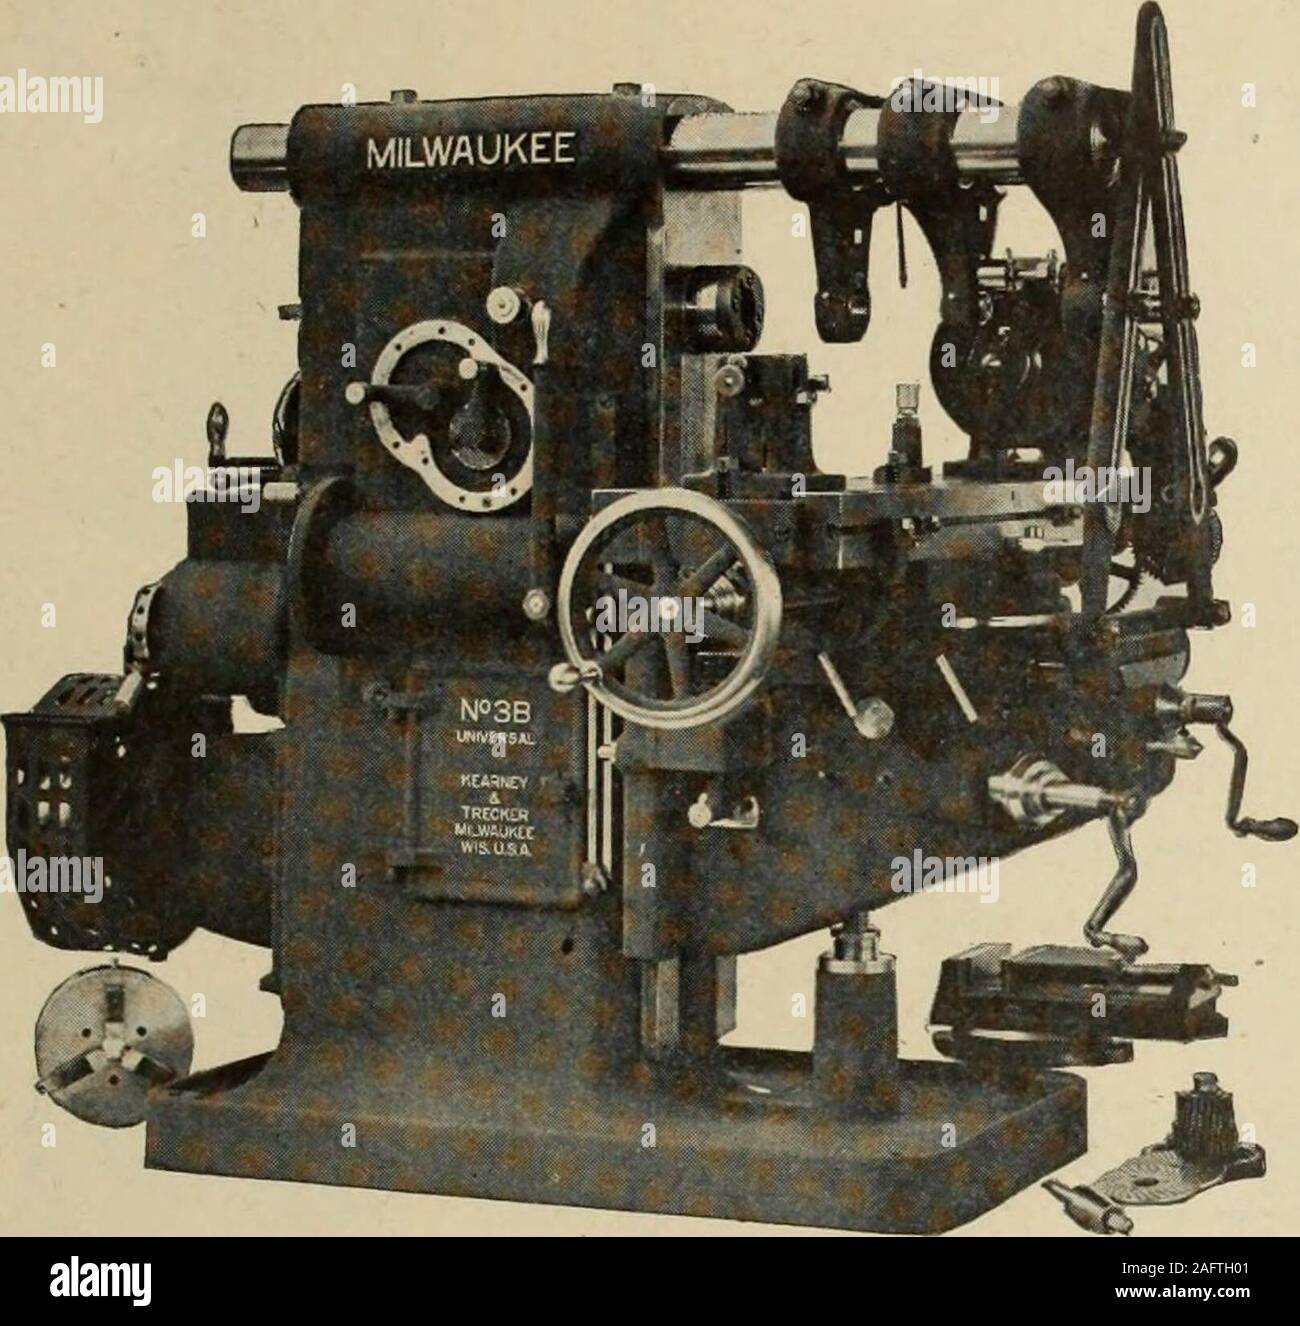 . Canadian machinery and metalworking (January-June 1913). her features, together withfirst-class workmanship, thatmake GARVIN Milling Machinesmost Powerful, Rigid andAccurate. The design is such that themachines keep their originalfactory accuracy. Immediate Deliveries FOR FURTHER INFORMATION Ask a Garvin user ASK YOUR DEALER ORWRITE US DIRECT Send to** Circular No. 134 MANUFACTURED BY THE GARVIN MACHINE CO. Spring and Varick Streets 4S Years jn new YORK CITY MANUFACTURERS OF Visitors Welcome Universal, Plain, Hand, Vertical, Lincoln, Duplex, Profile and Vertical Spindle Milling Machines: Sur Stock Photo